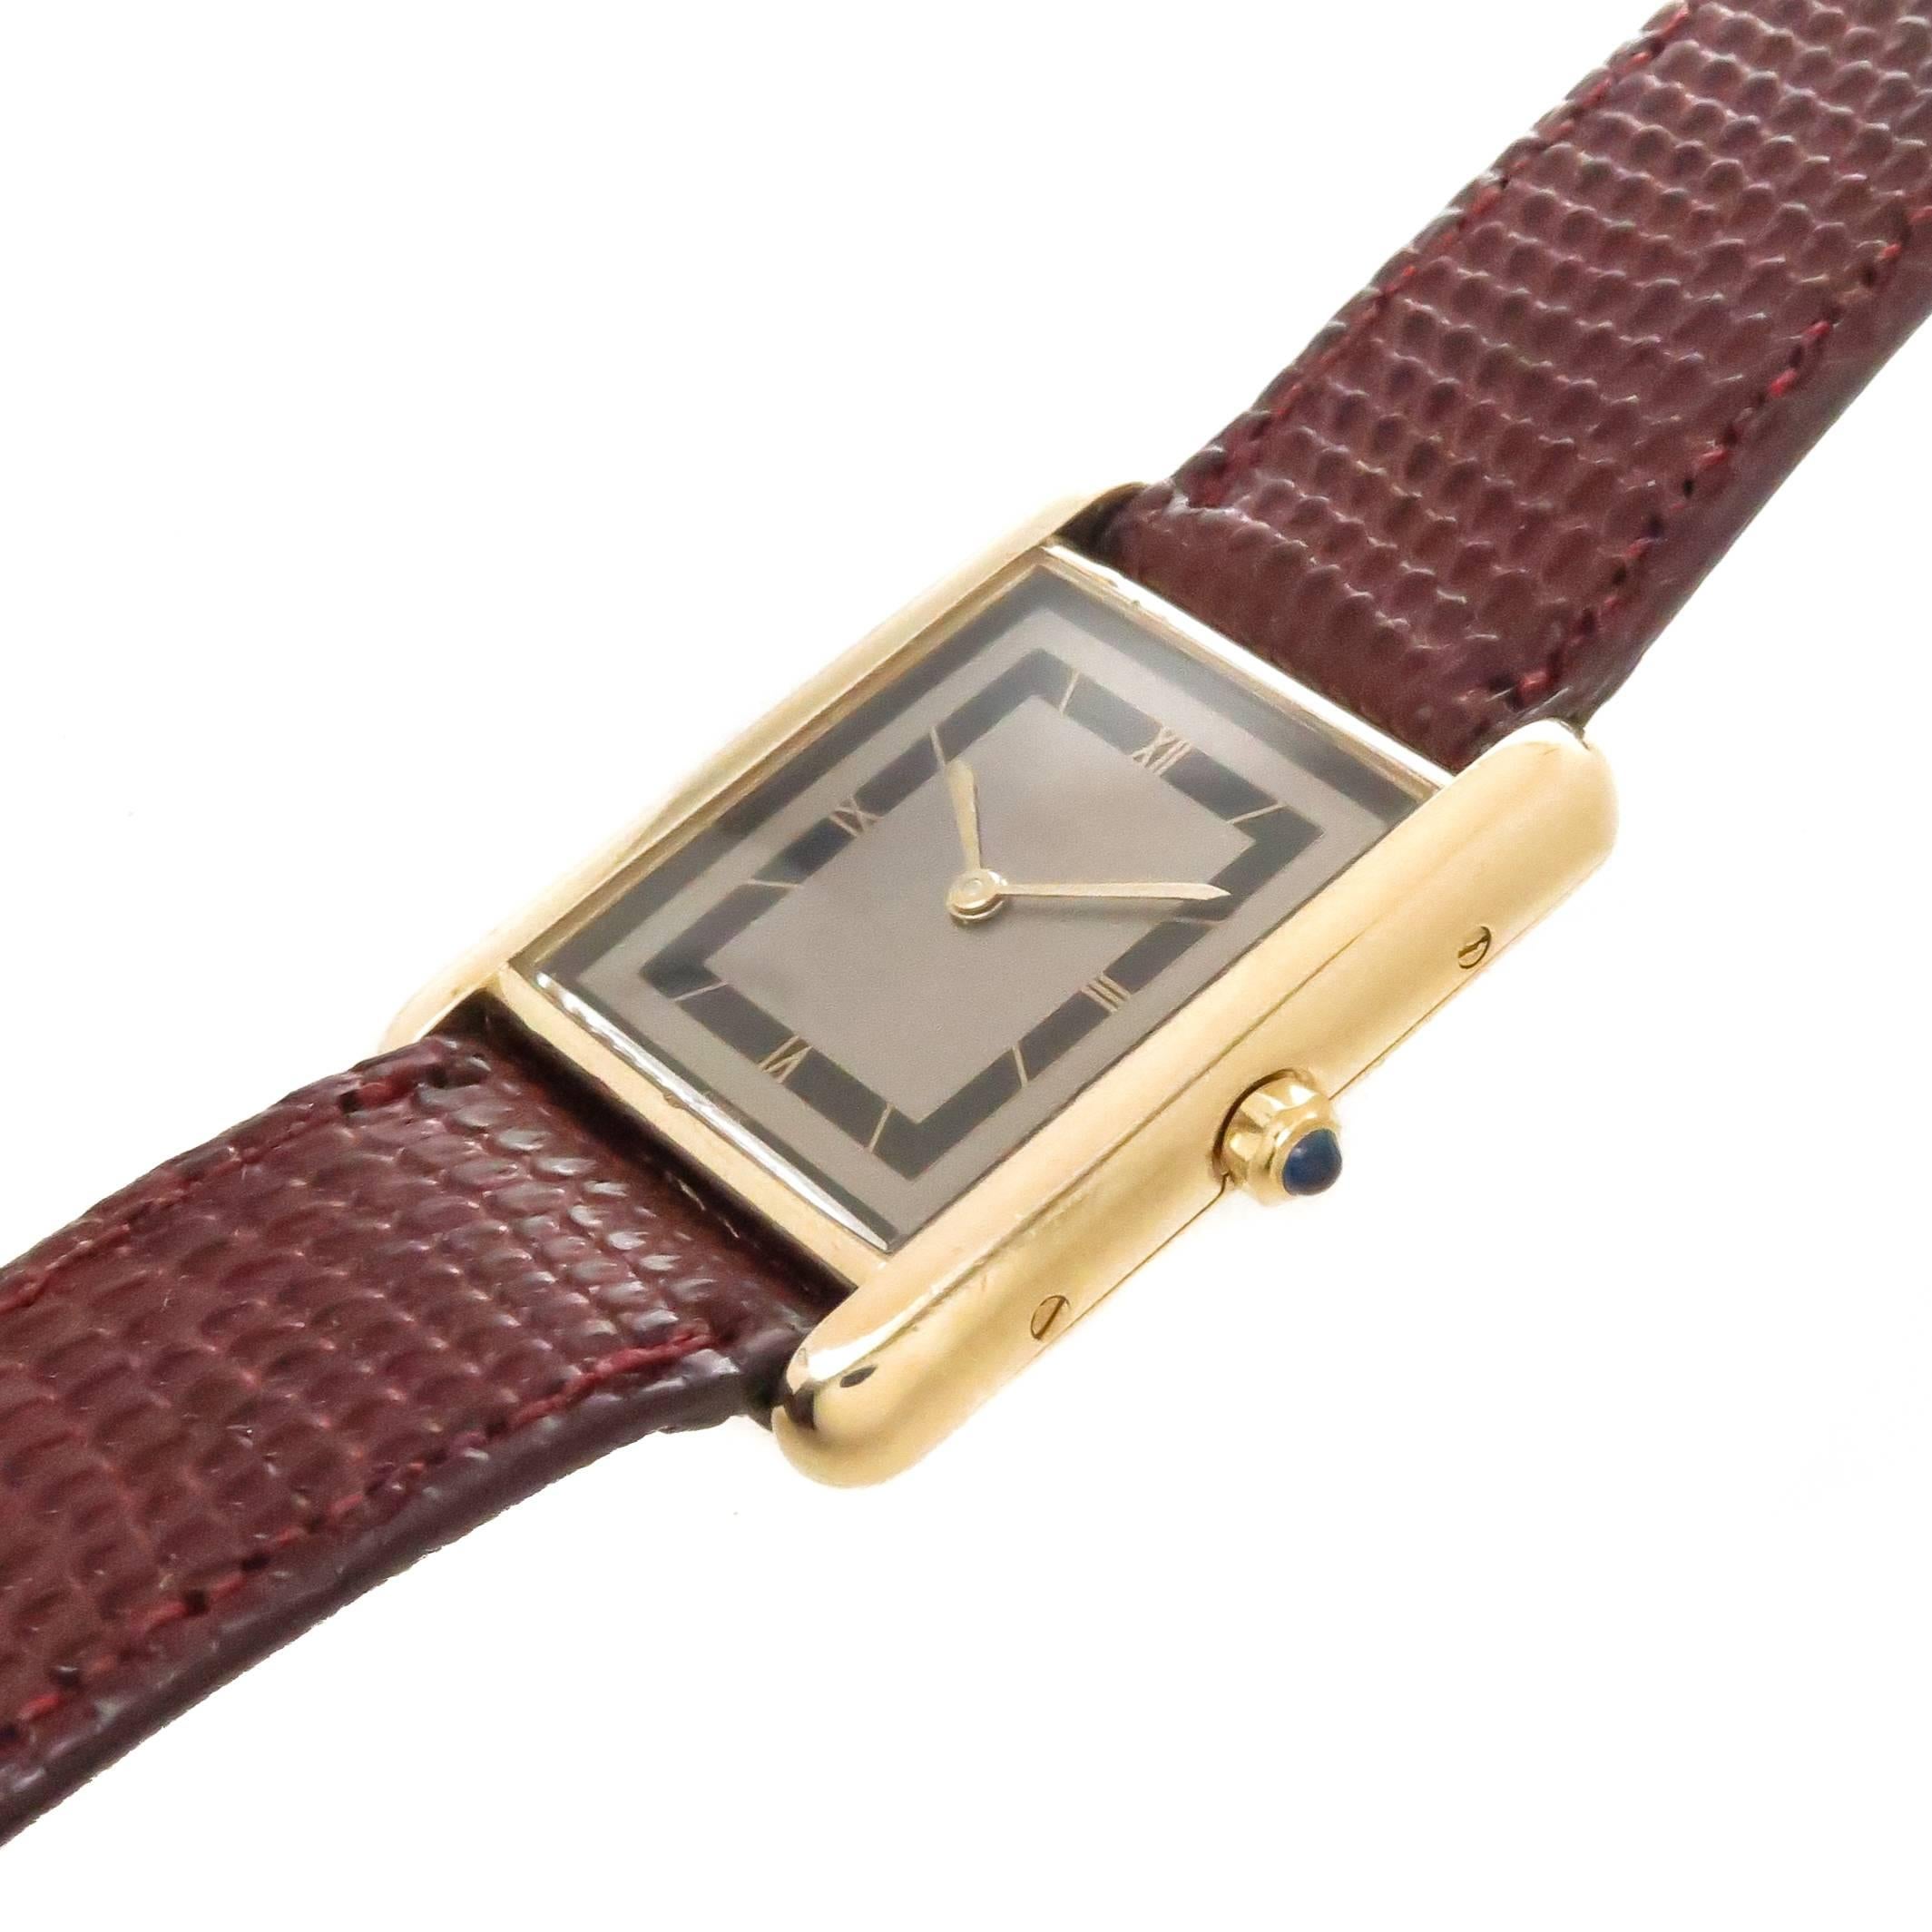 Circa 2000 Cartier Classic Tank Wrist Watch, 30 X 23 MM Vermeil ( Gold Plate on Sterling Silver ) Case. Quartz Movement 
 and a sapphire Crown. This watch features the very hard to find Gray dial with Black inner Track. Original Cartier Burgundy